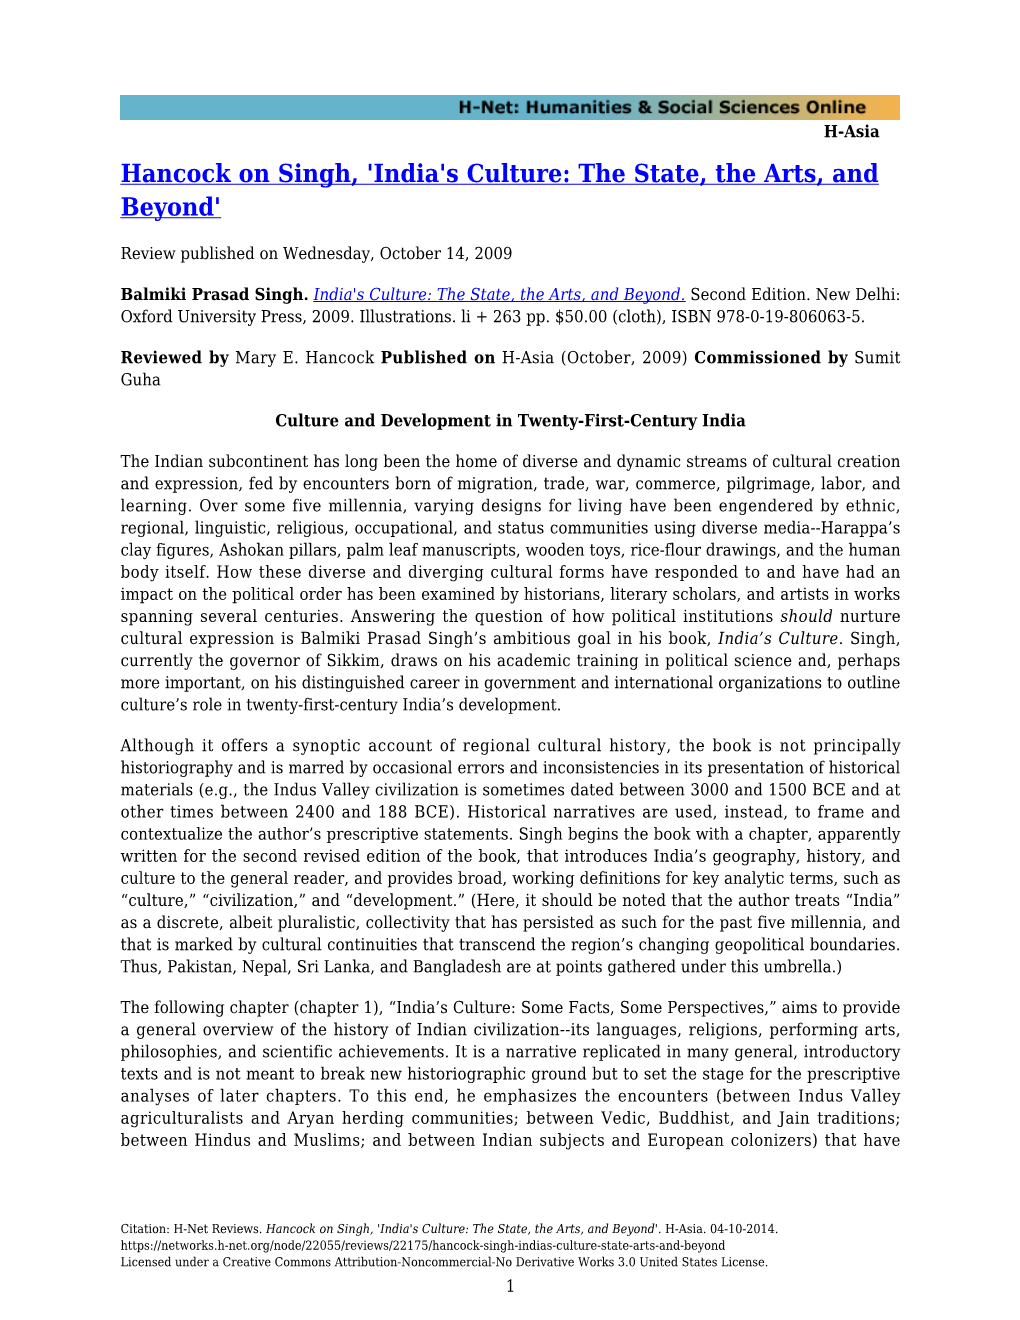 Hancock on Singh, 'India's Culture: the State, the Arts, and Beyond'